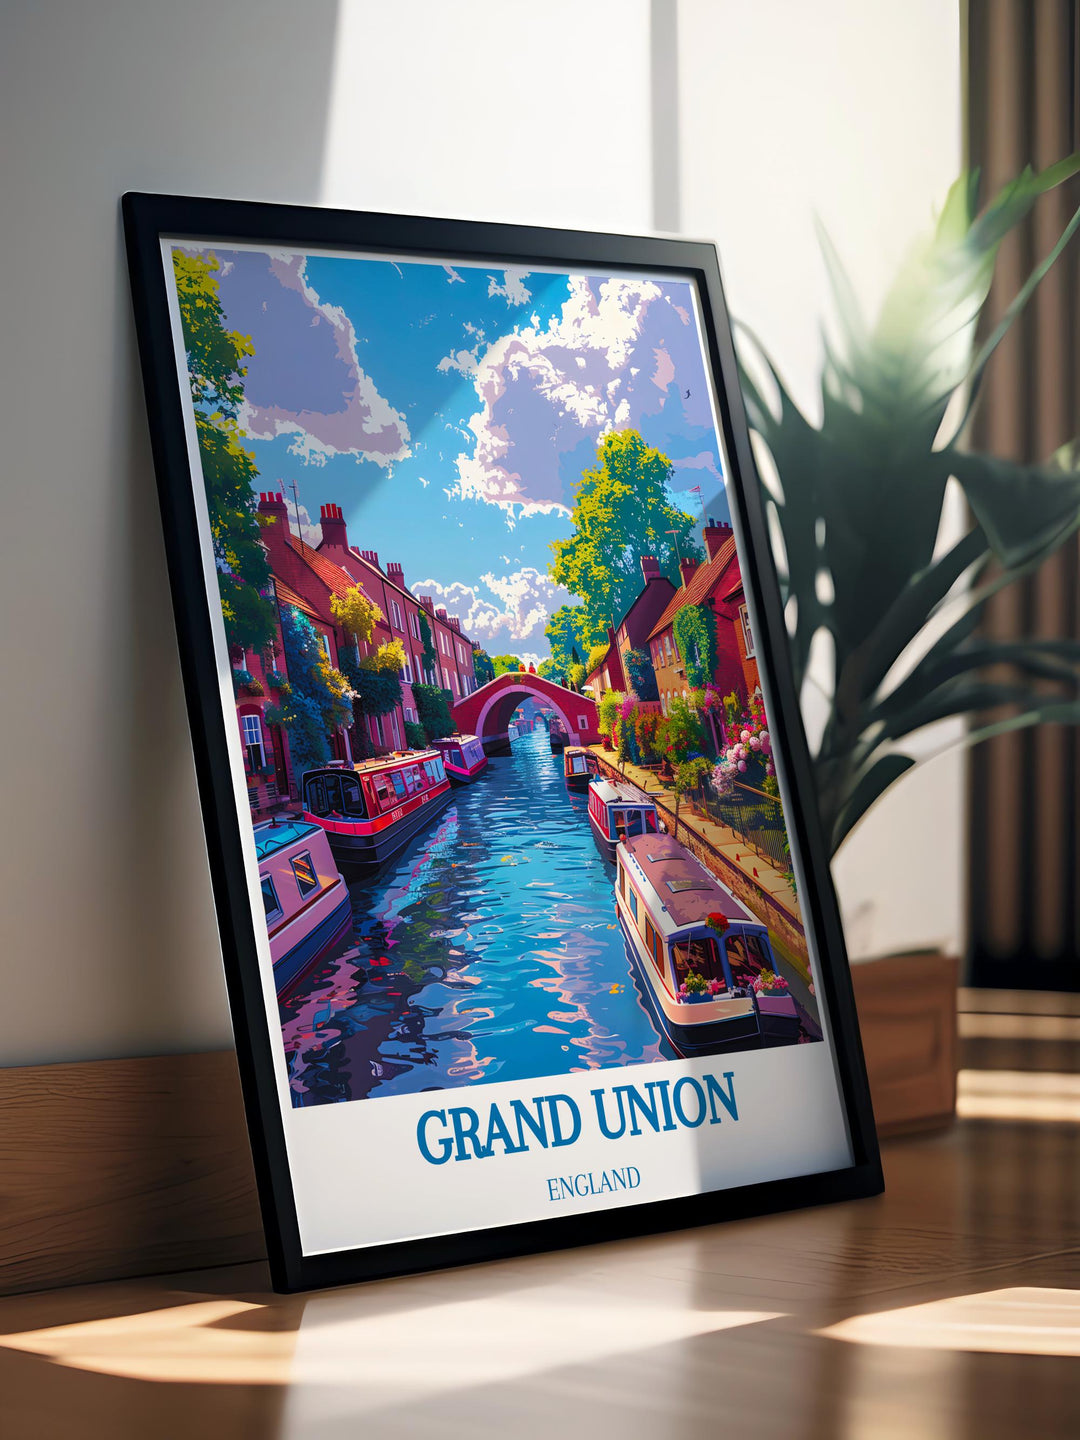 Retro style travel print of Little Venice, London, highlighting the blend of urban and natural beauty along the Grand Union Canal.